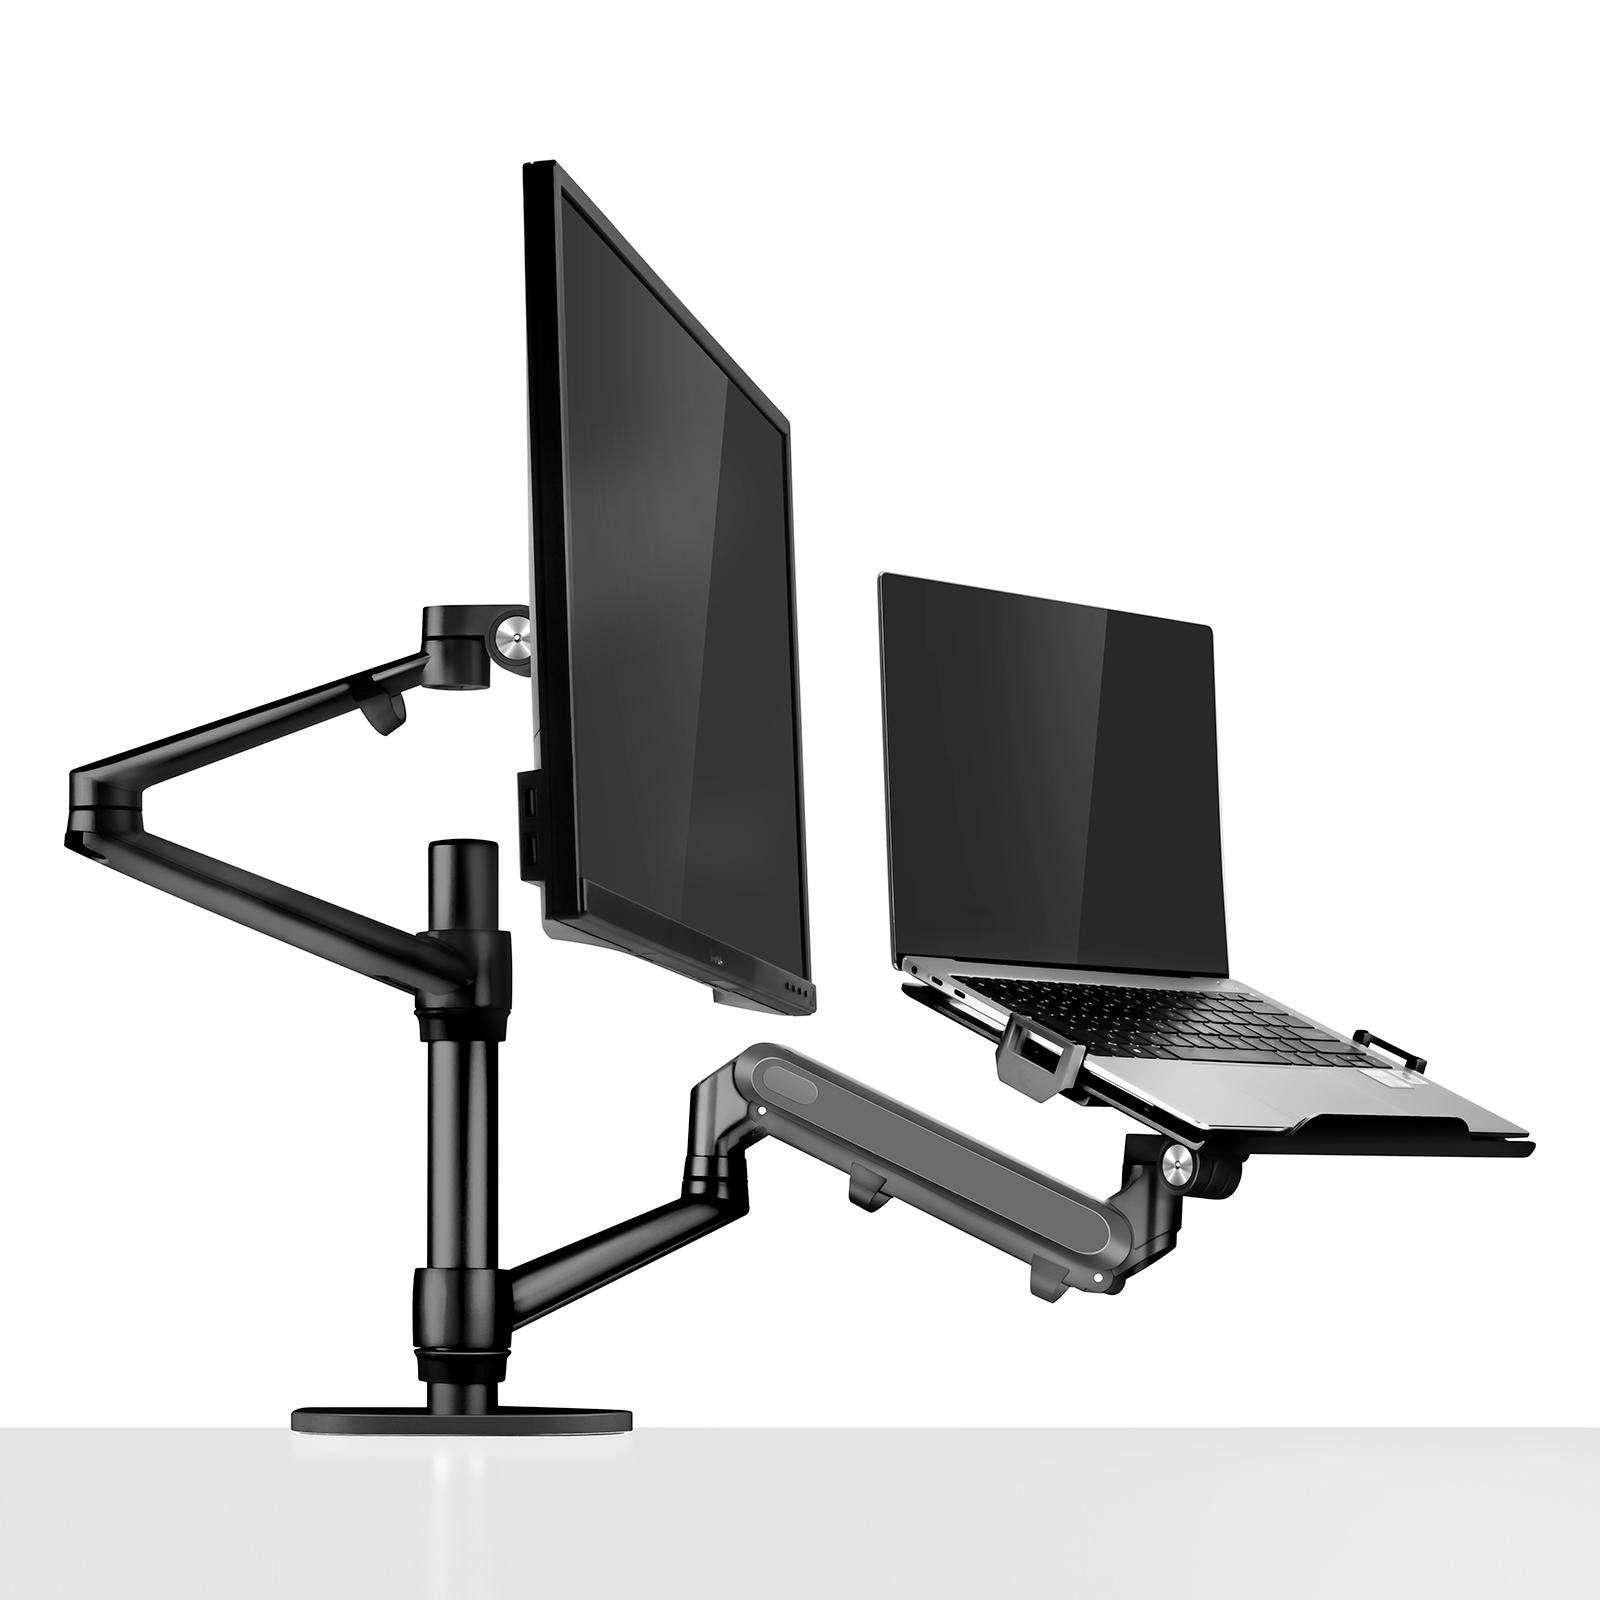 Single Monitor Arm with Gas Spring and Laptop Stand Desk Mount Bracket Black